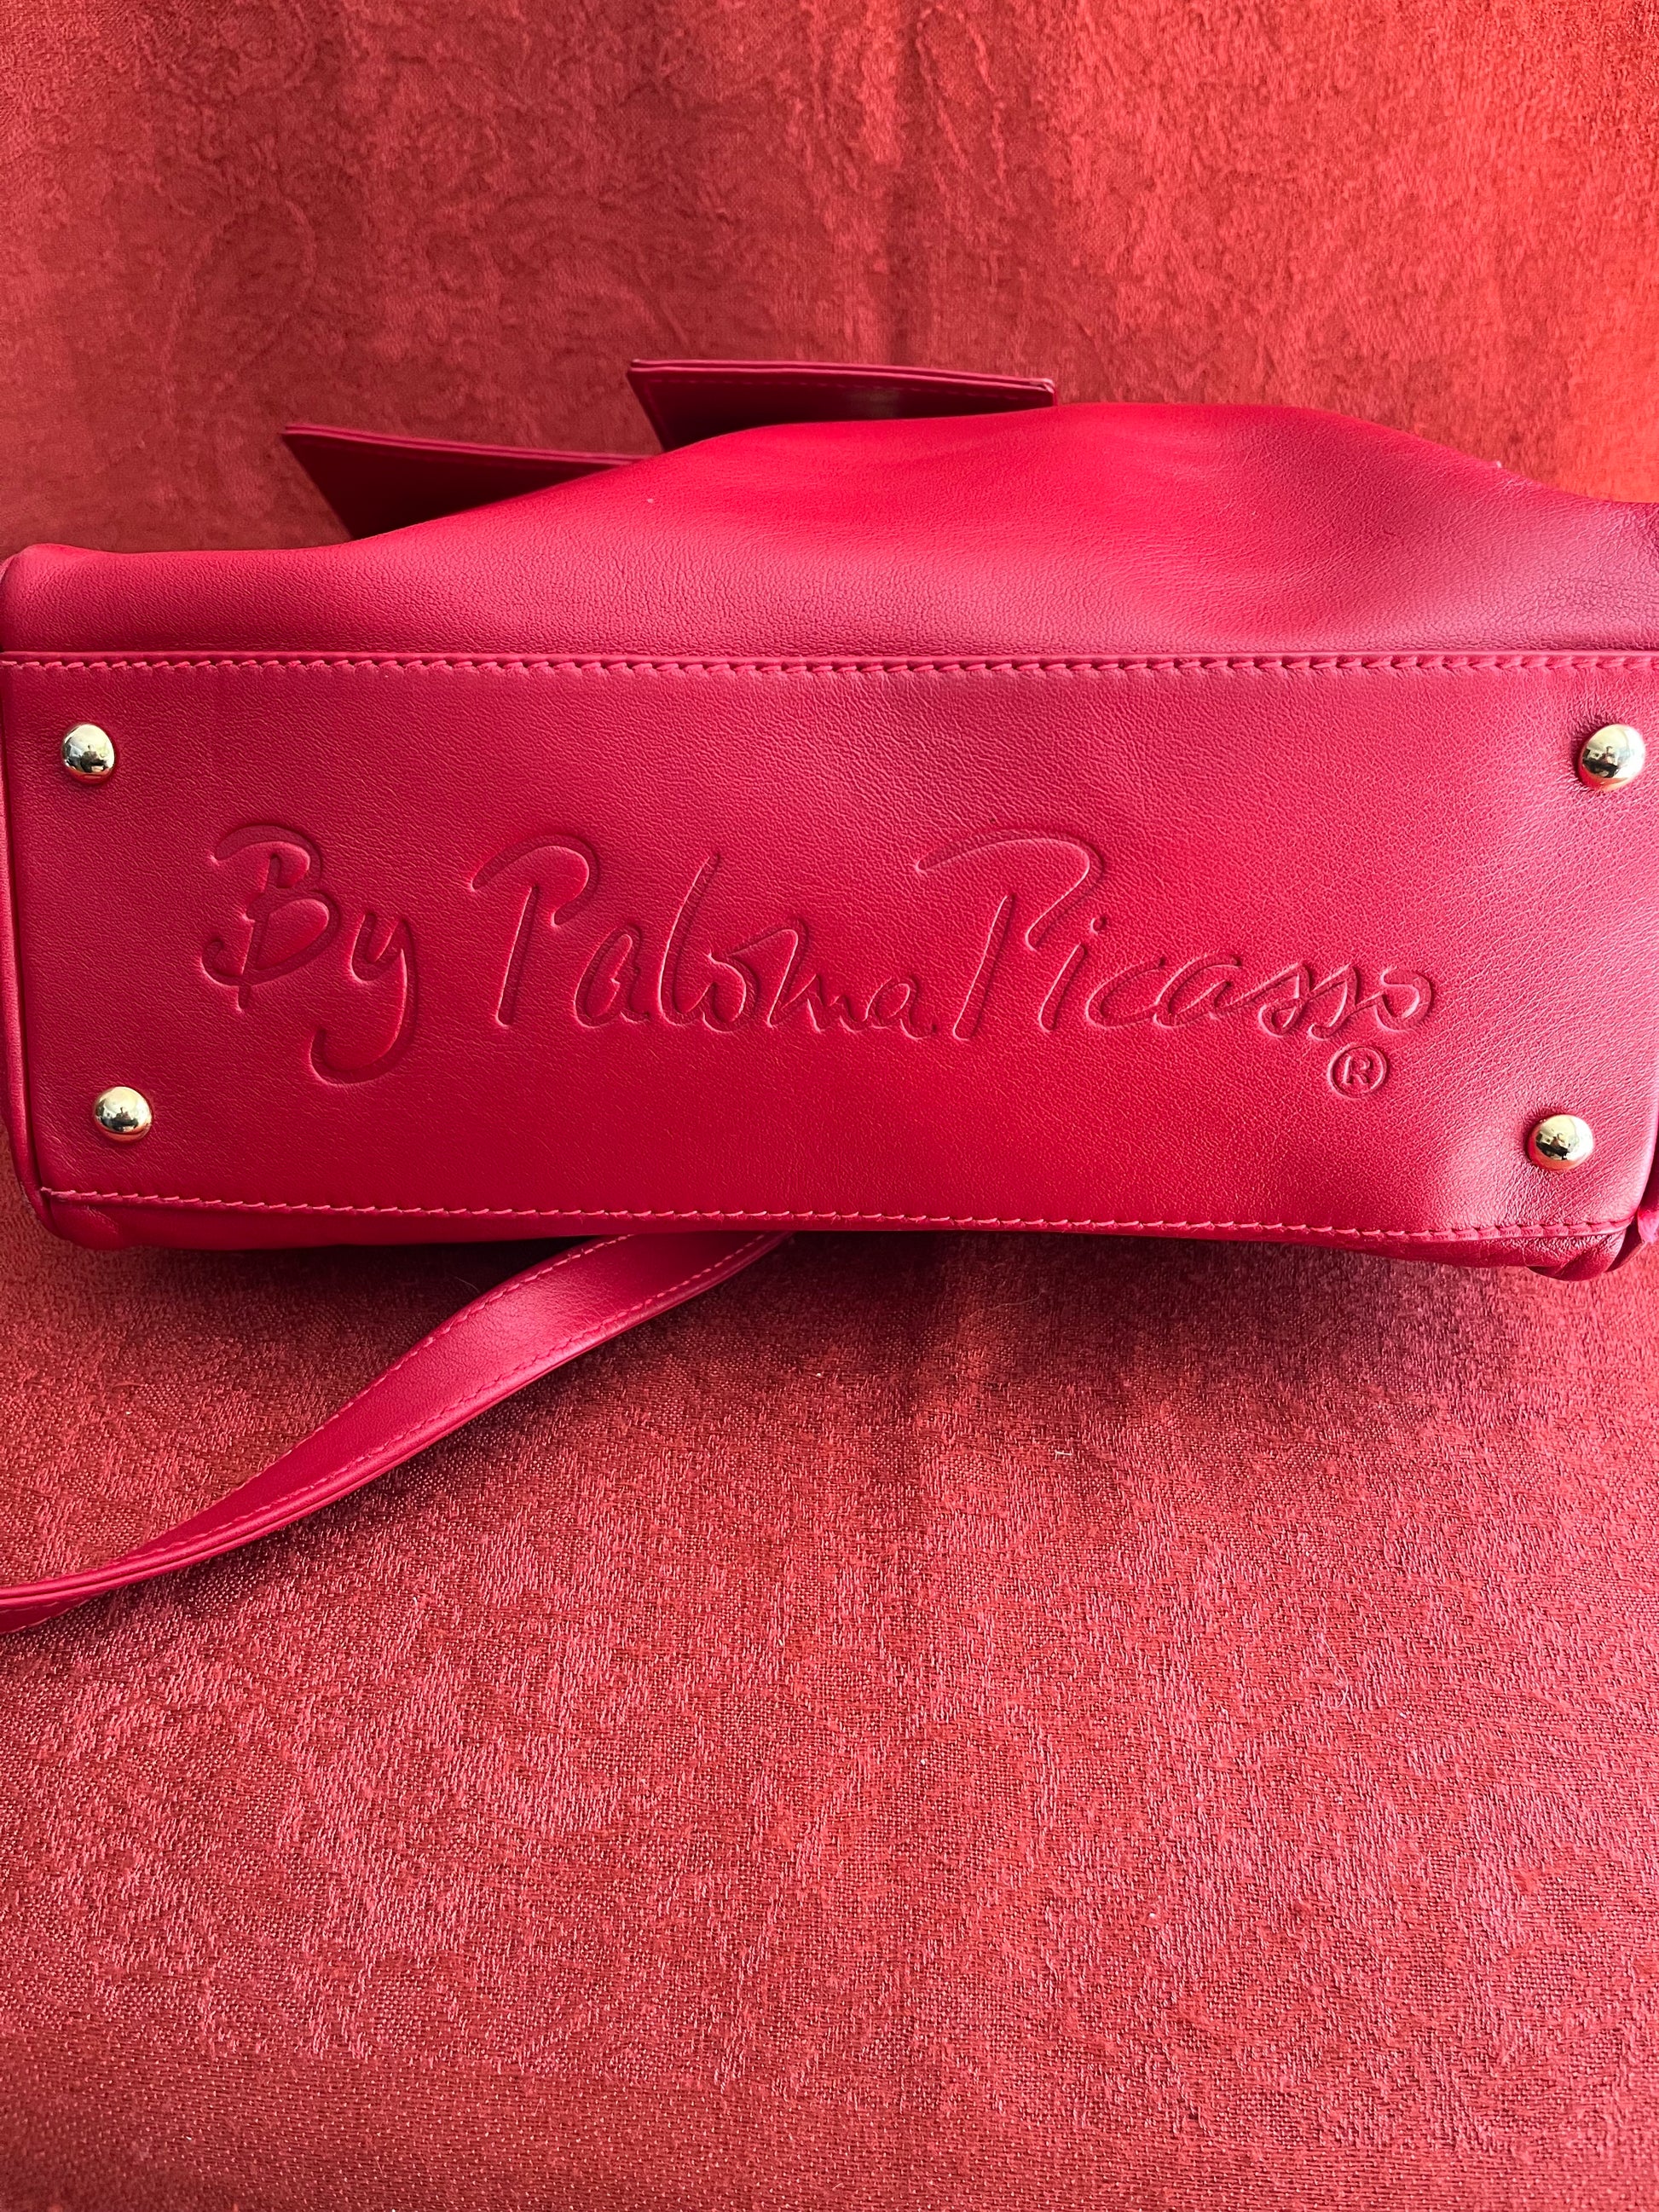 Paloma Picasso Leather Bag 